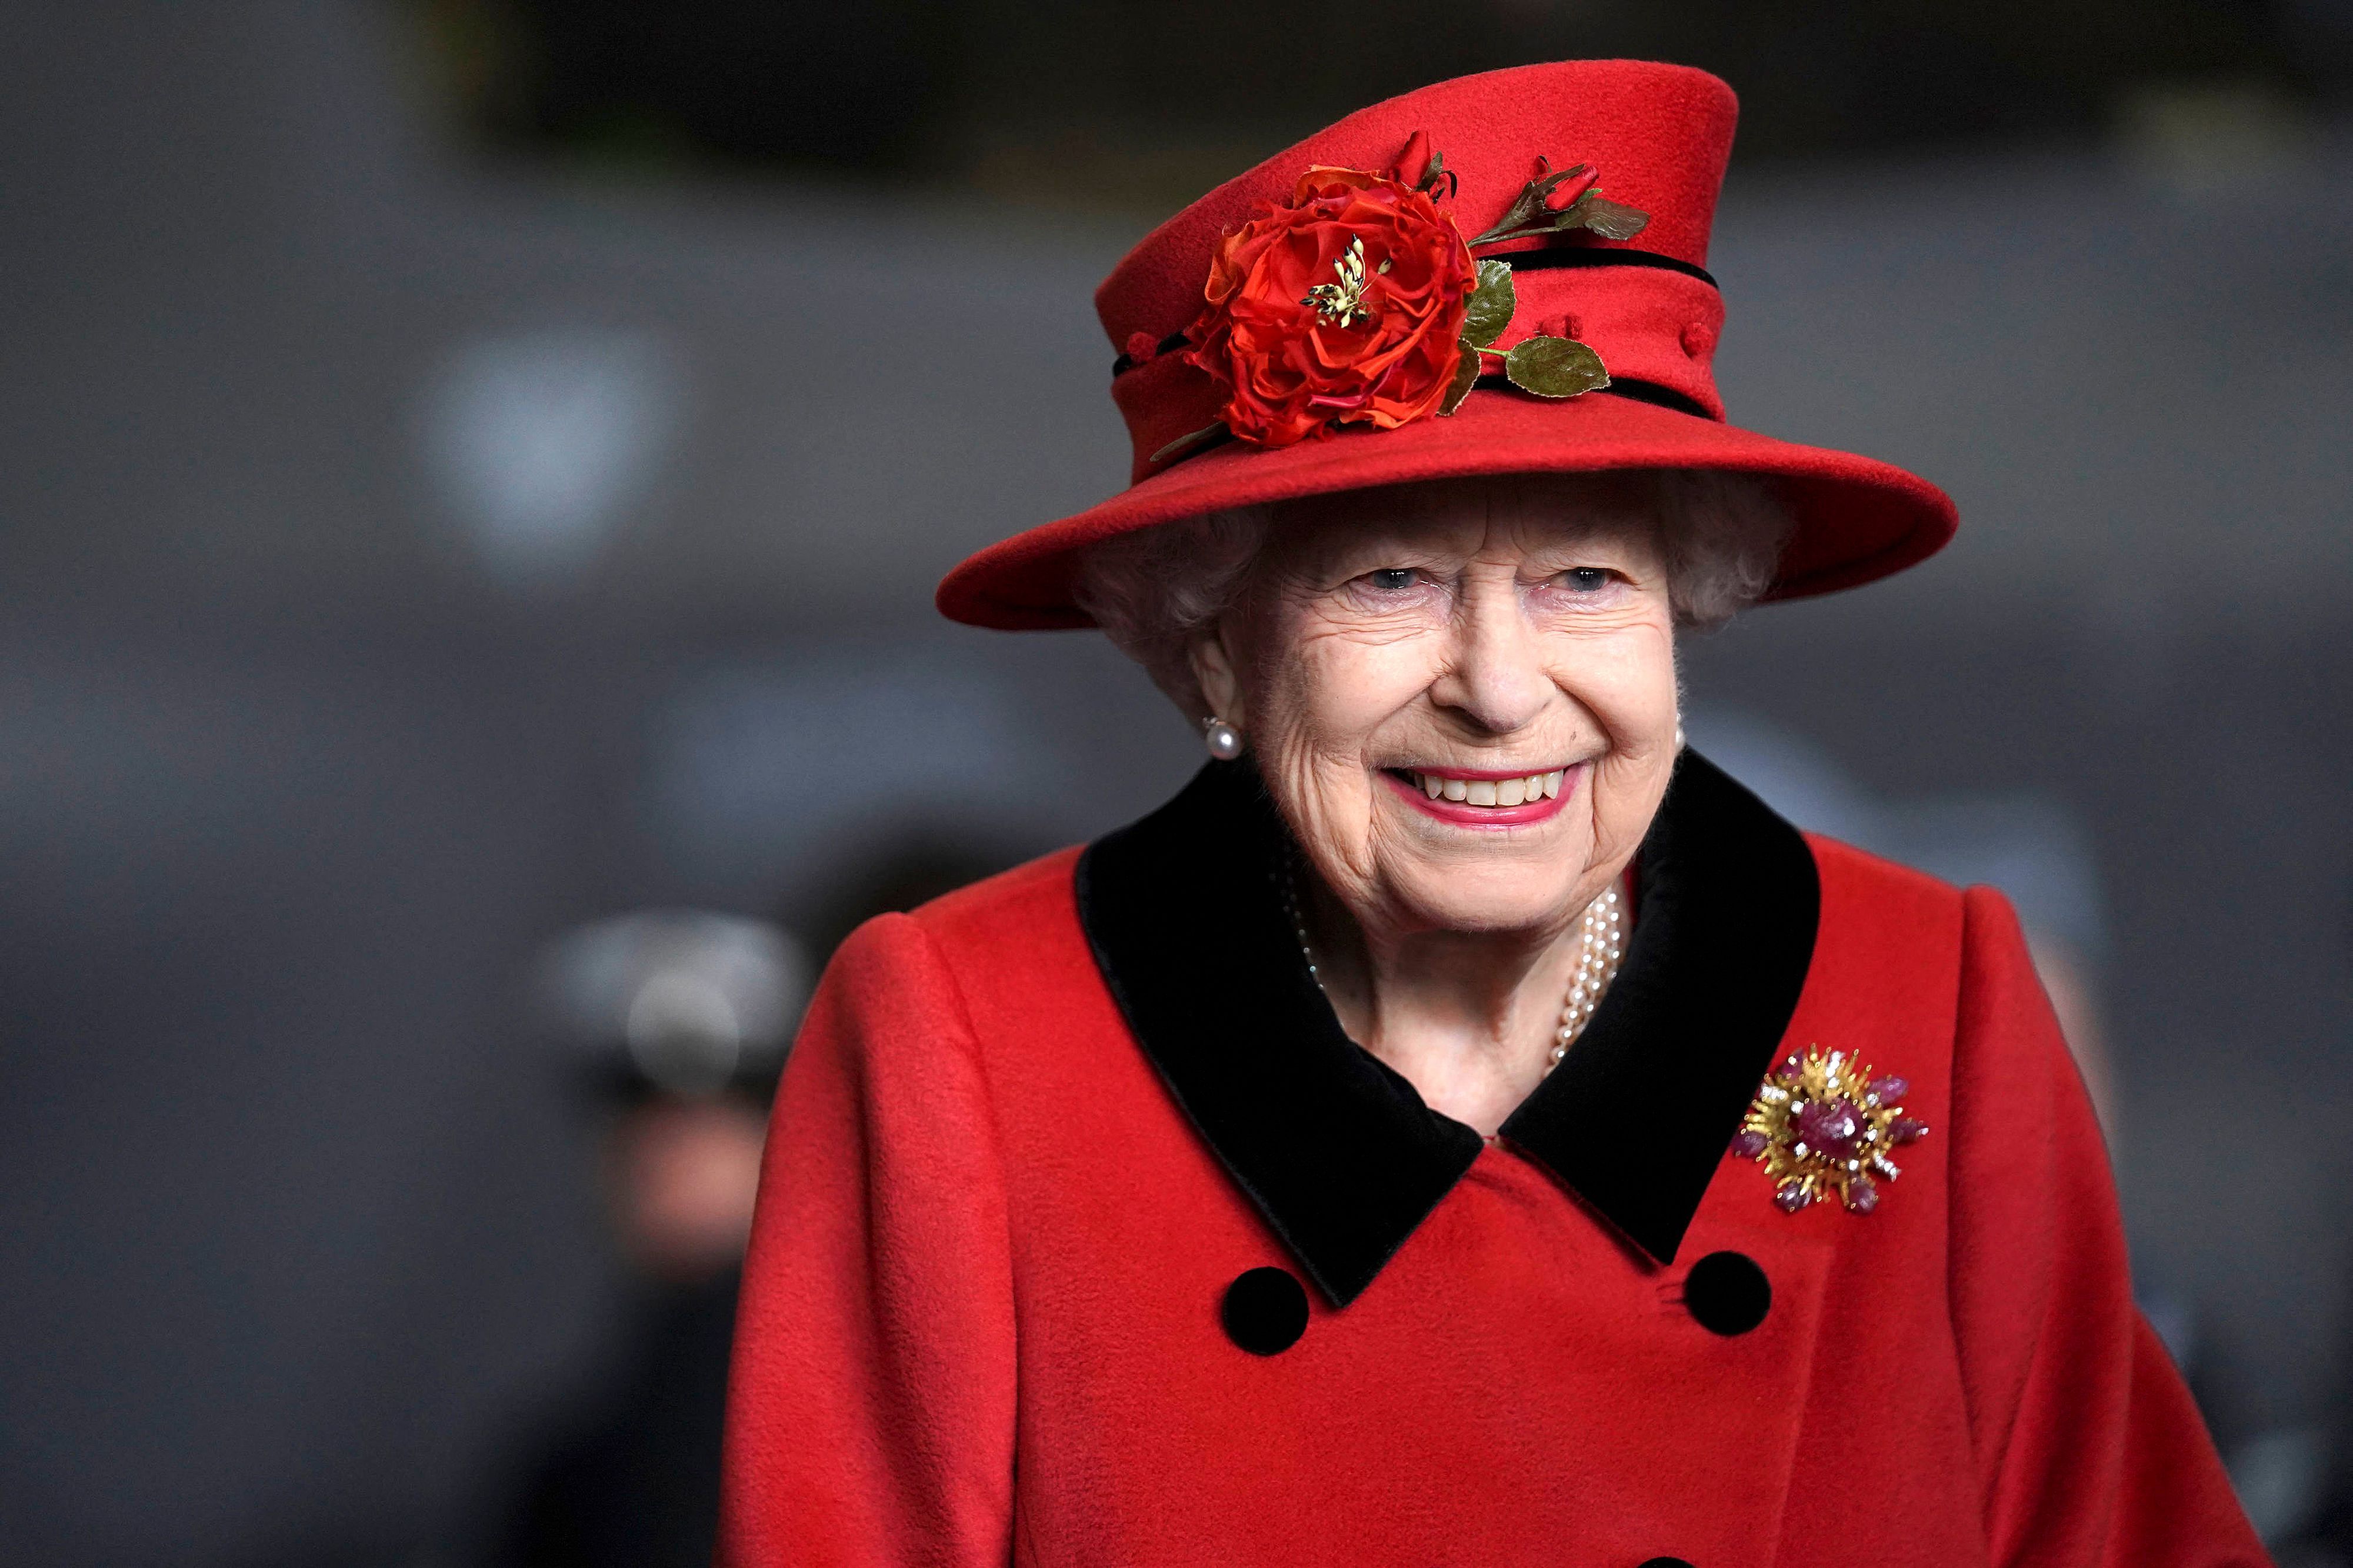 Queen Elizabeth II reacts during her visit to the aircraft carrier HMS Queen Elizabeth in Portsmouth, southern England on May 22, 2021 | Getty Images